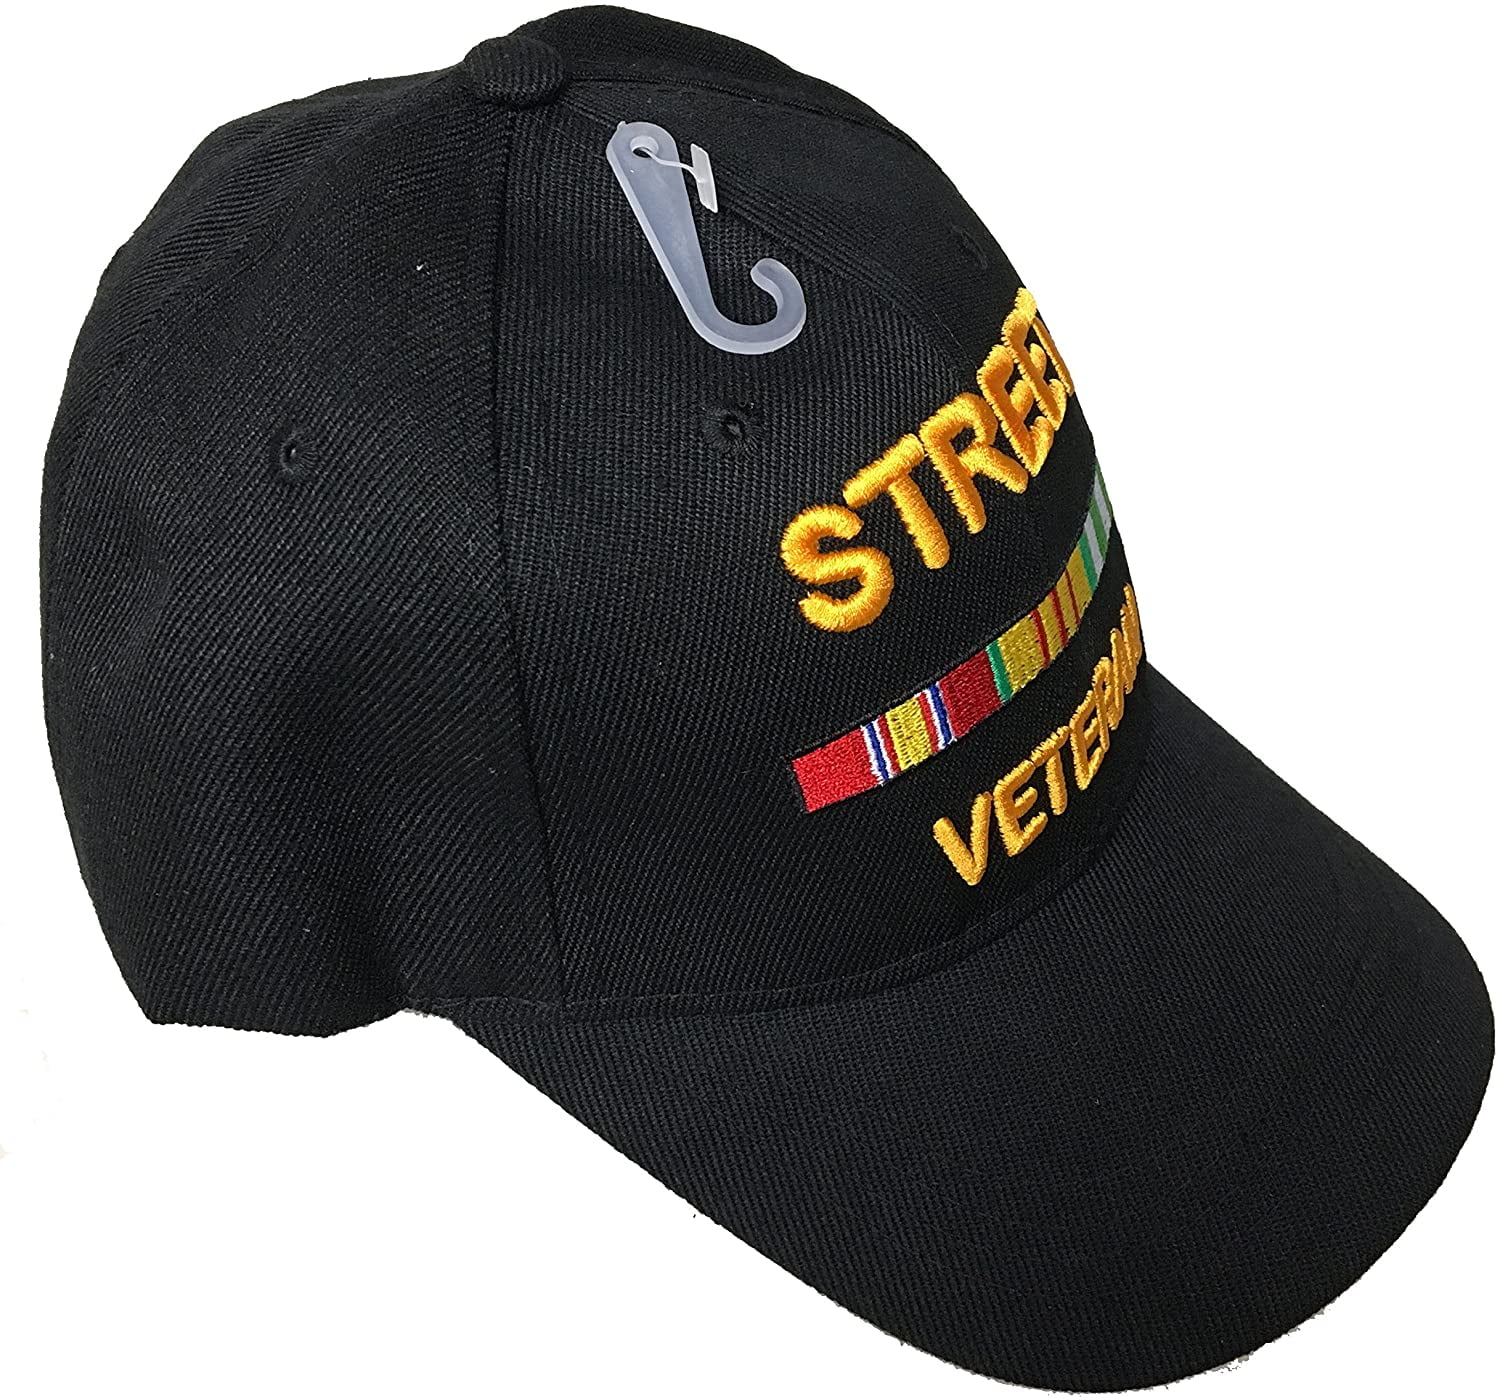 NEW STREET VETERAN BASEBALL STYLE EMBROIDERED HAT funny novelty ball fun cap A58 